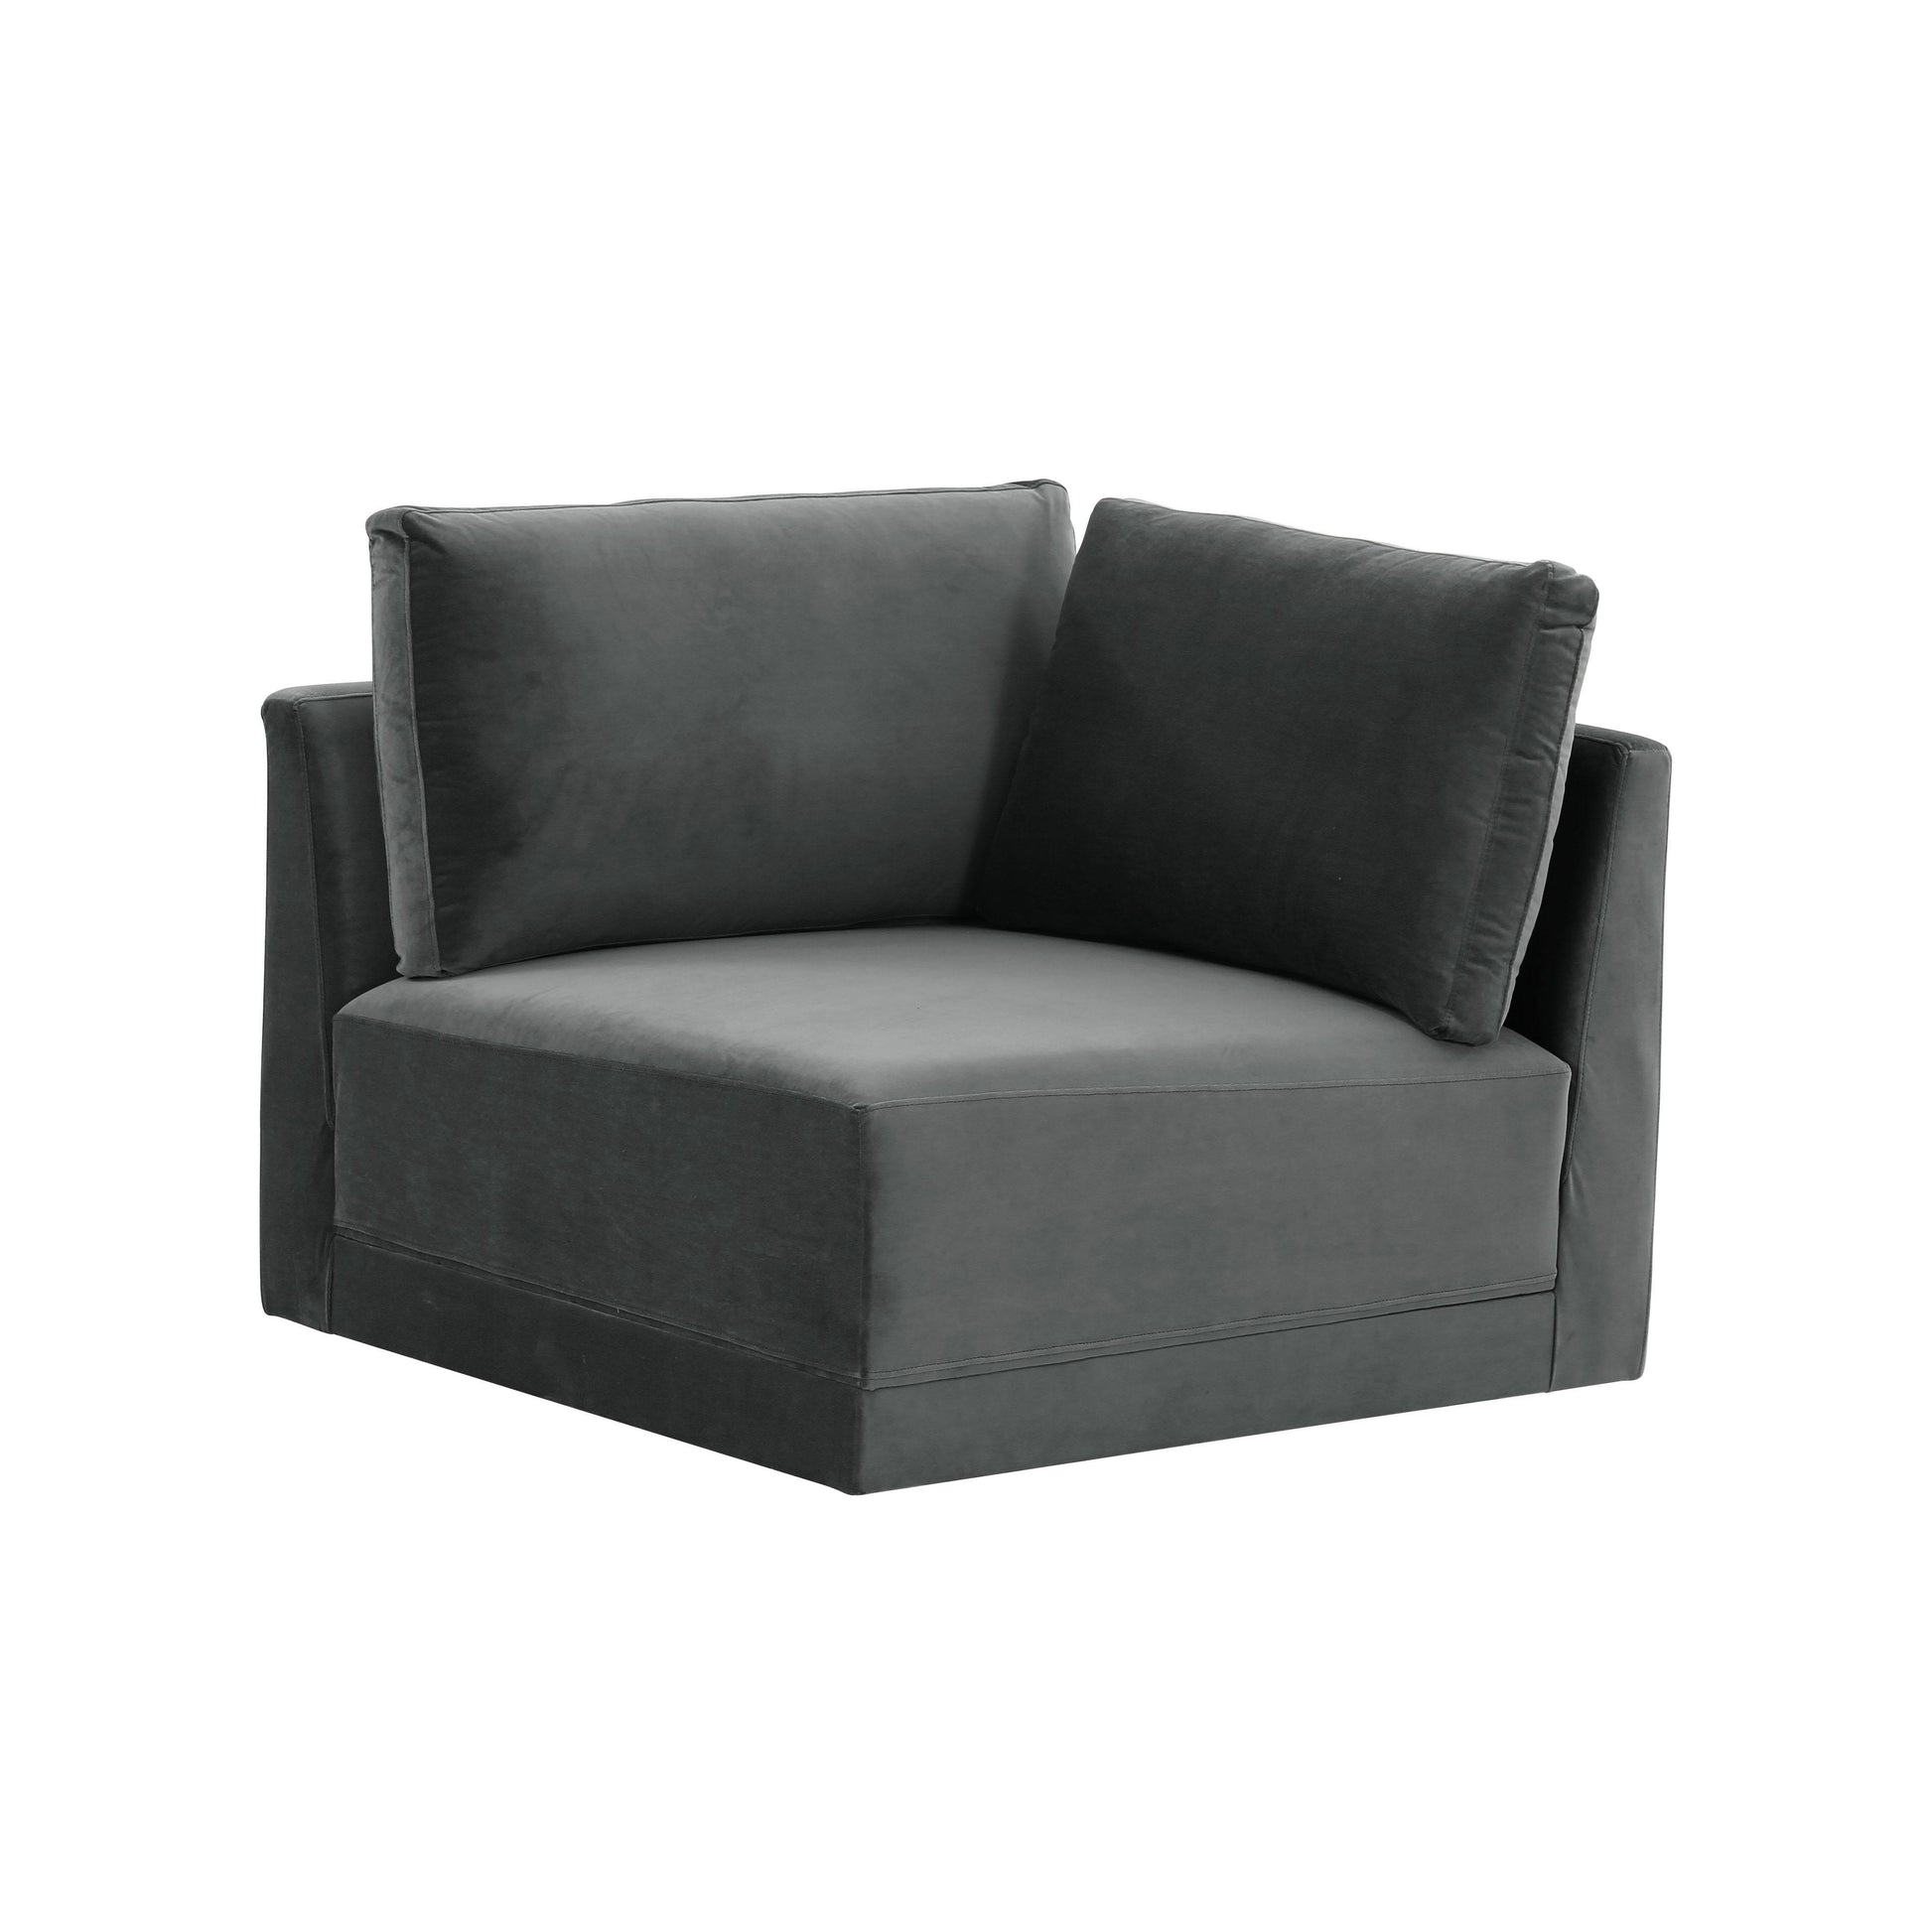 Tov Furniture Willow Charcoal Corner Chair